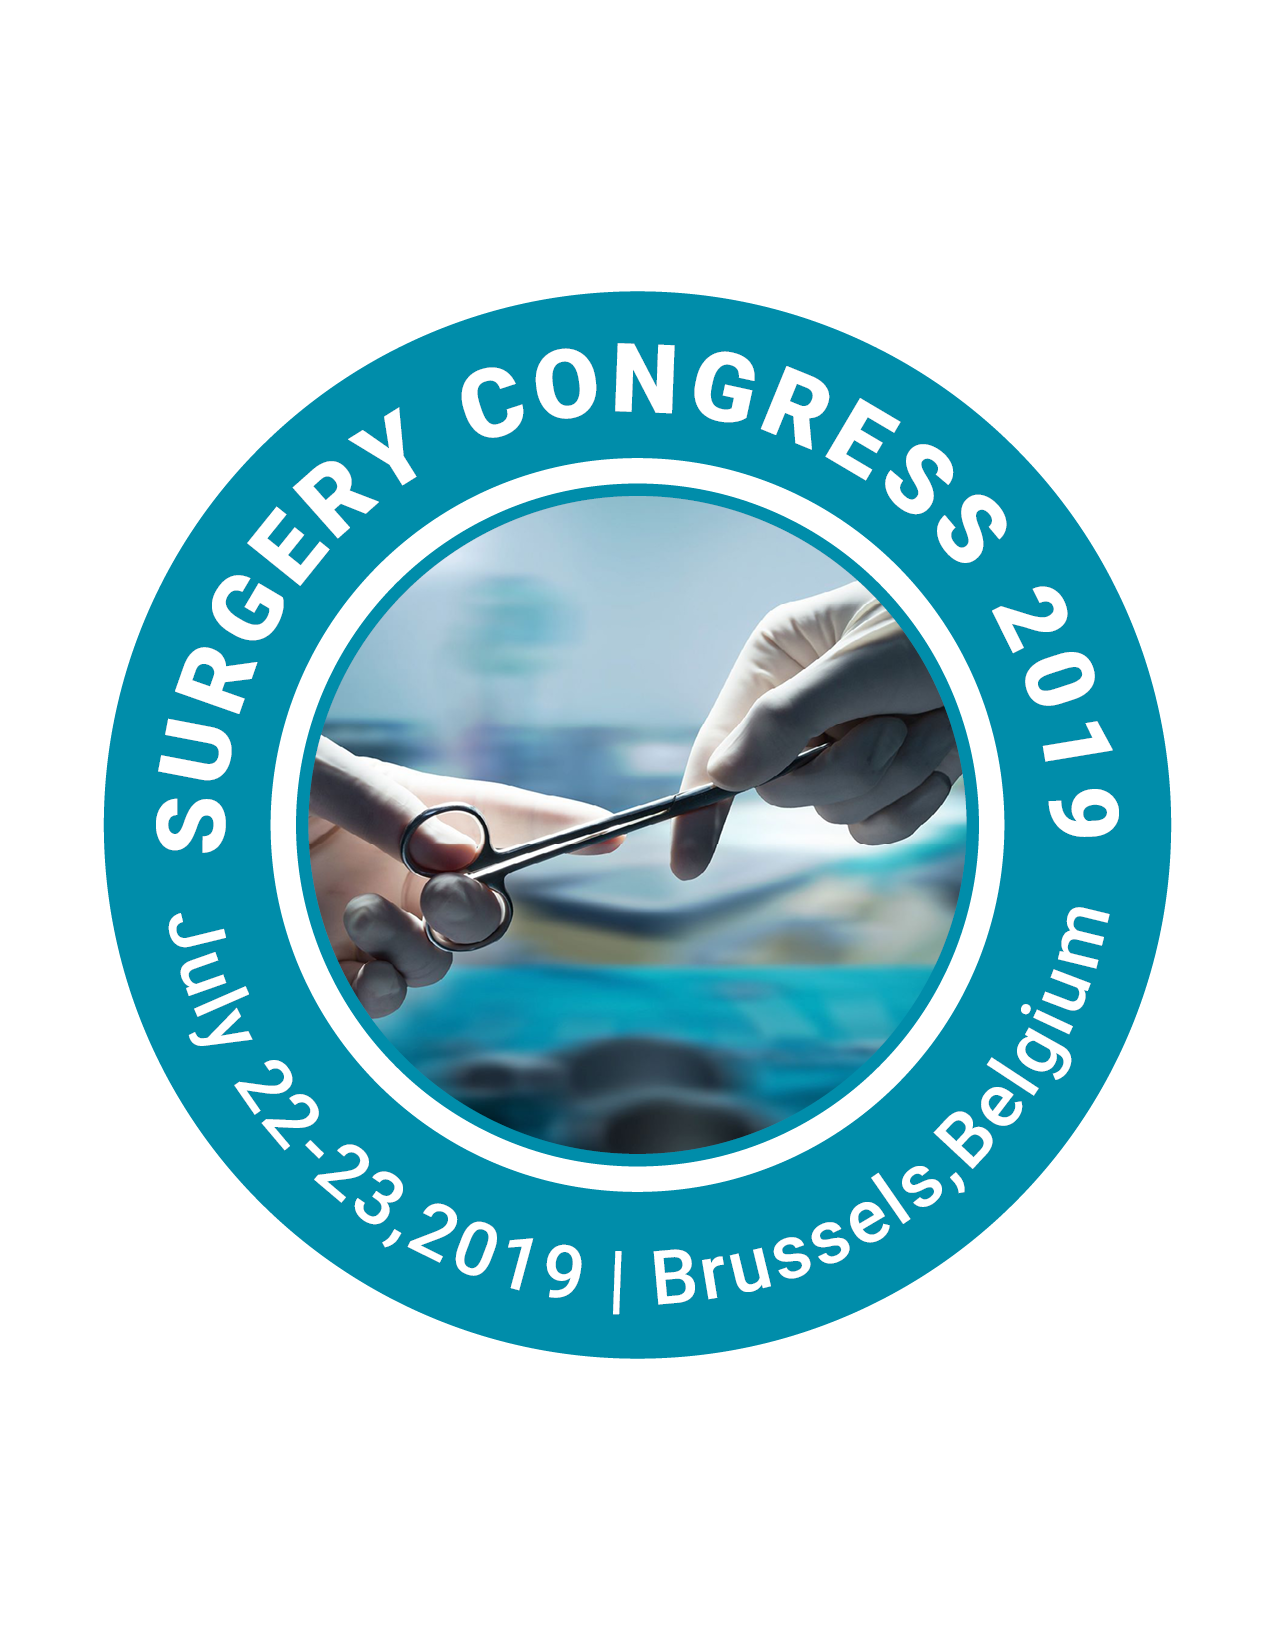 Name: 4th International Conference and  Expo on Surgery and Transplantation